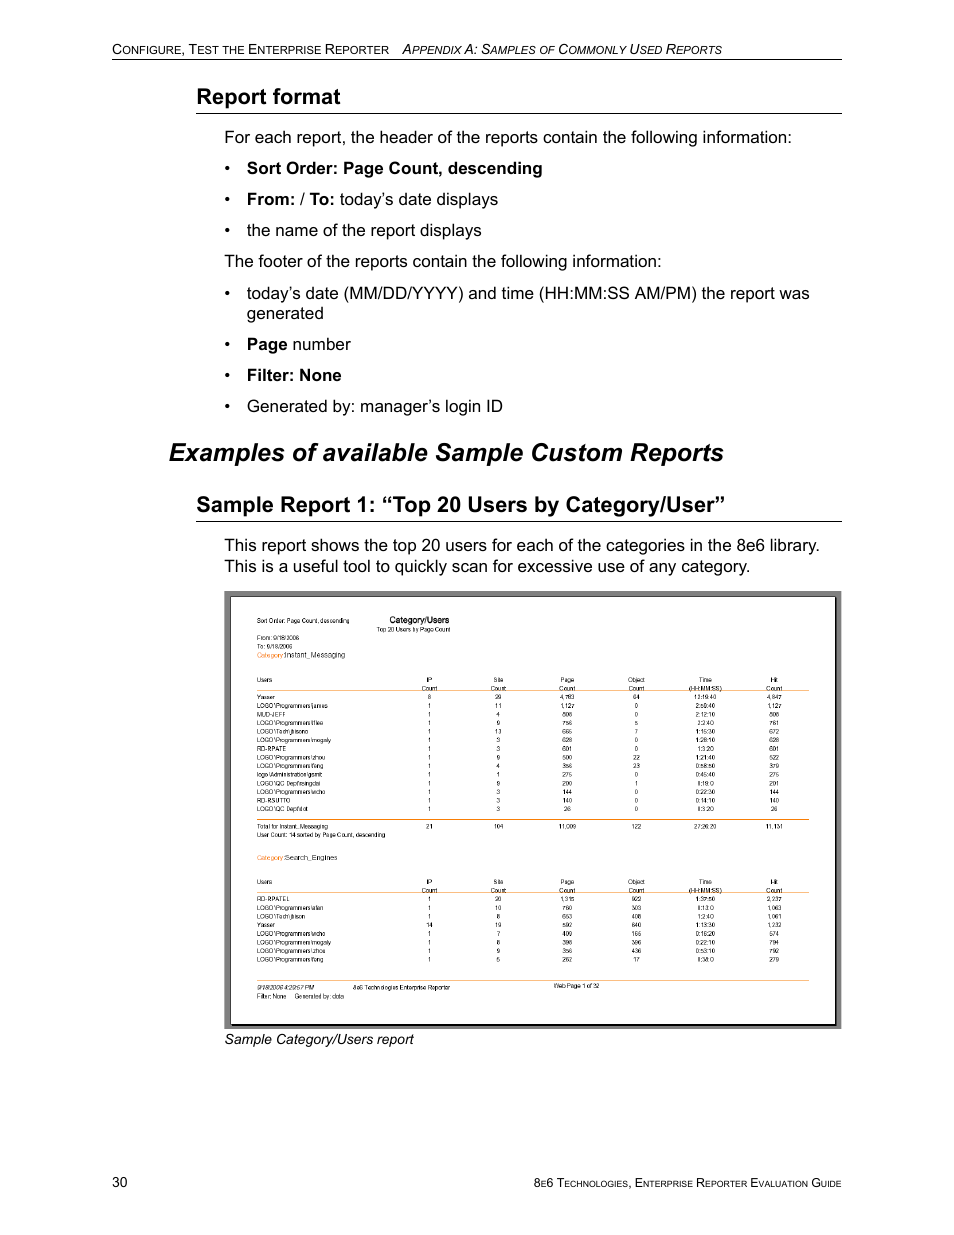 Report format, Examples of available sample custom reports, Sample report 1: “top 20 users by category/user | 8e6 Technologies Enterprise Reporter ER HL/SL User Manual | Page 34 / 48